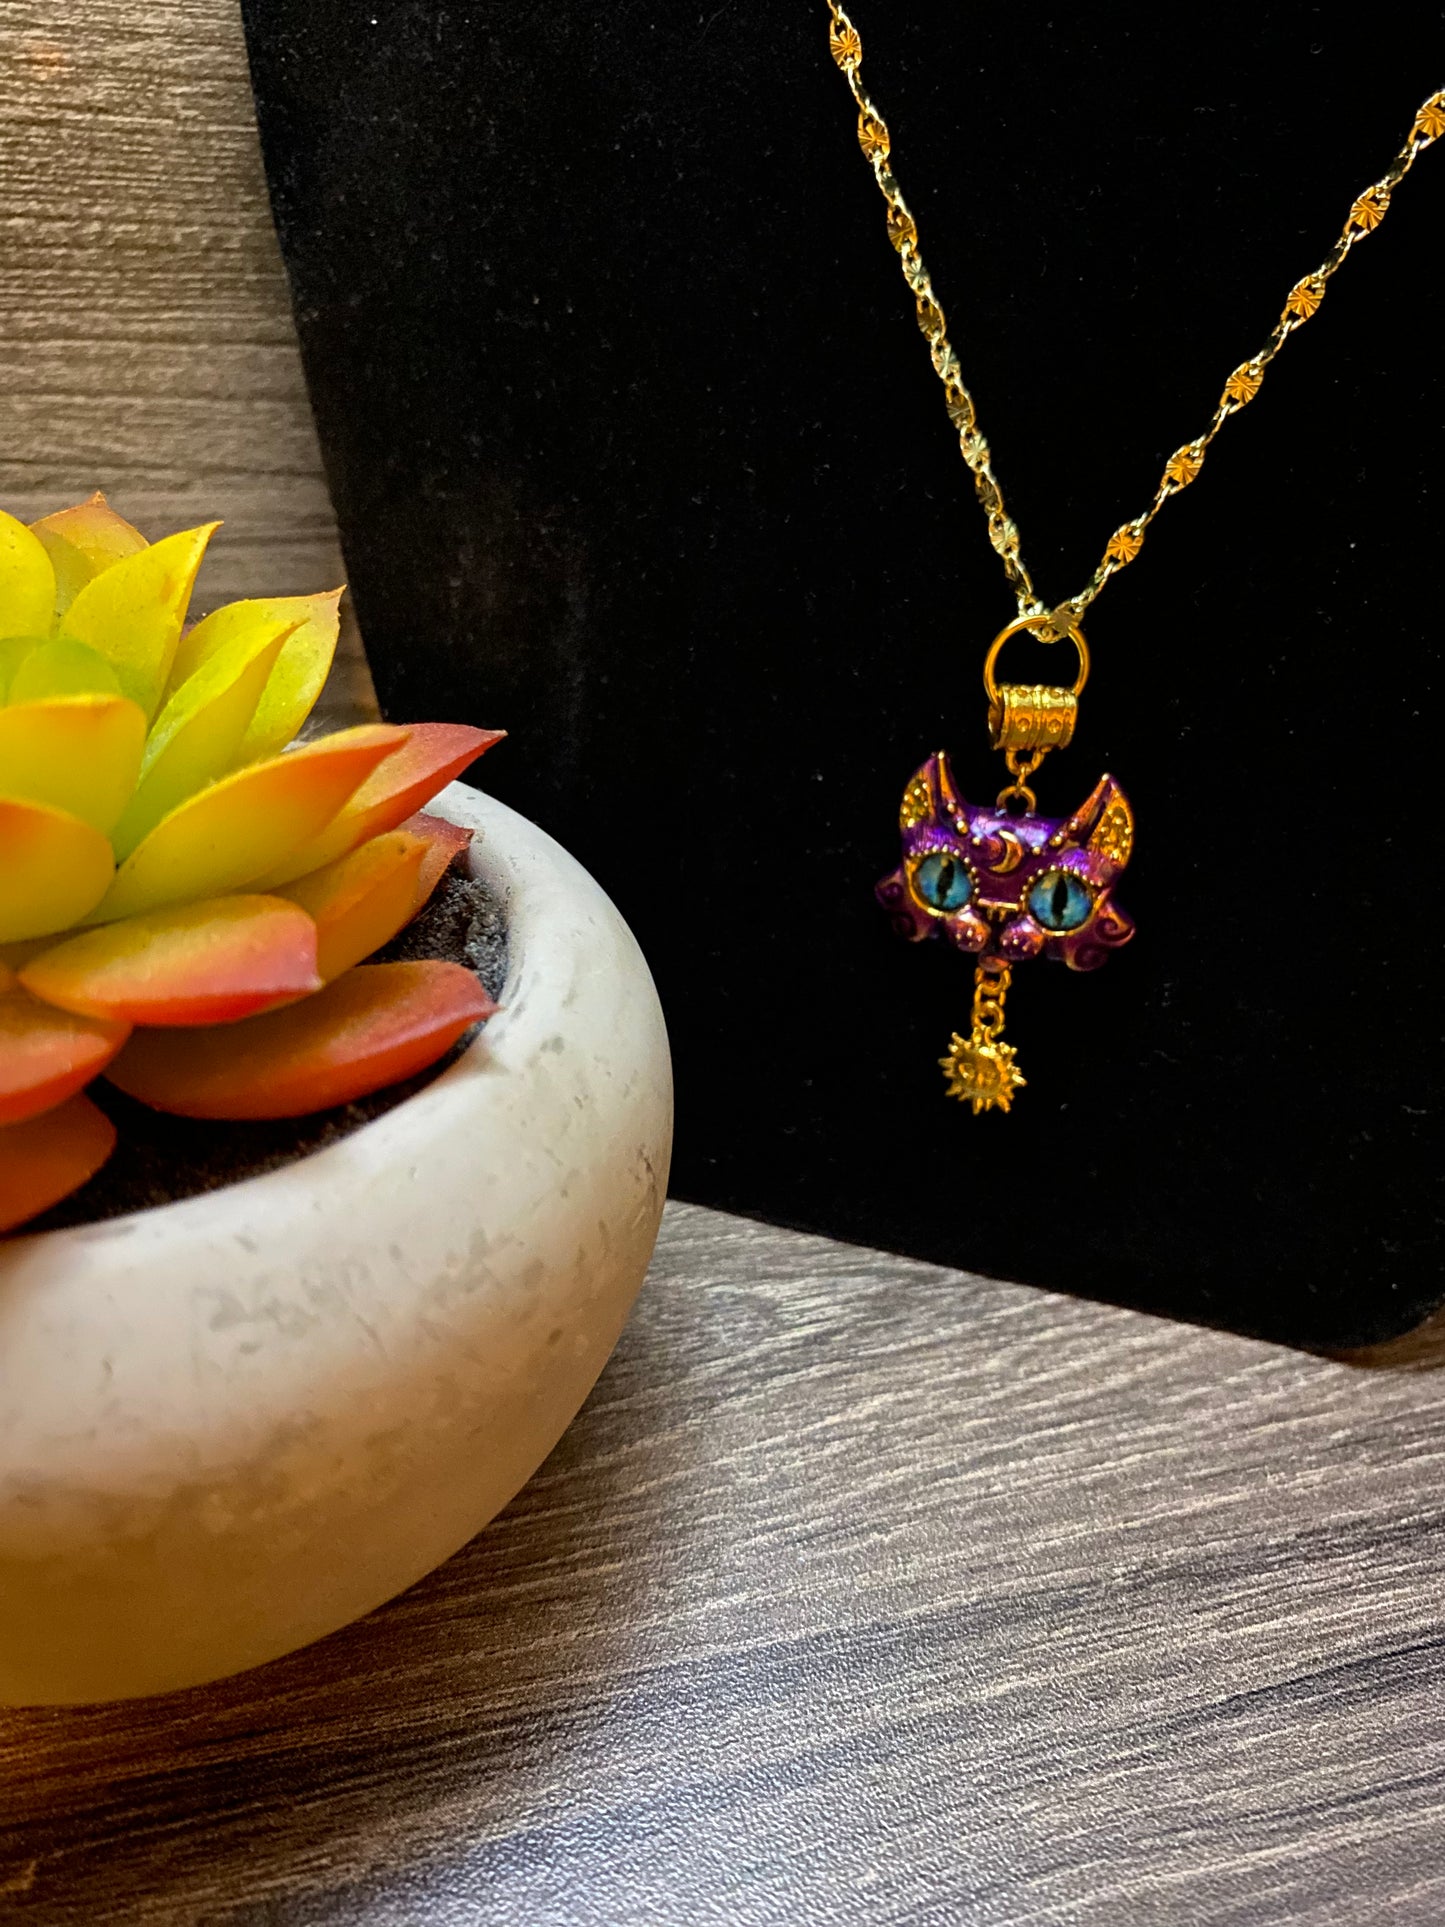 Spiritual Egyptian Blessed Cat Pendant Necklace For Protection, Good fortune, Good Health And Prosperity, Witchy Charm, Naturalist, Sun Goddess